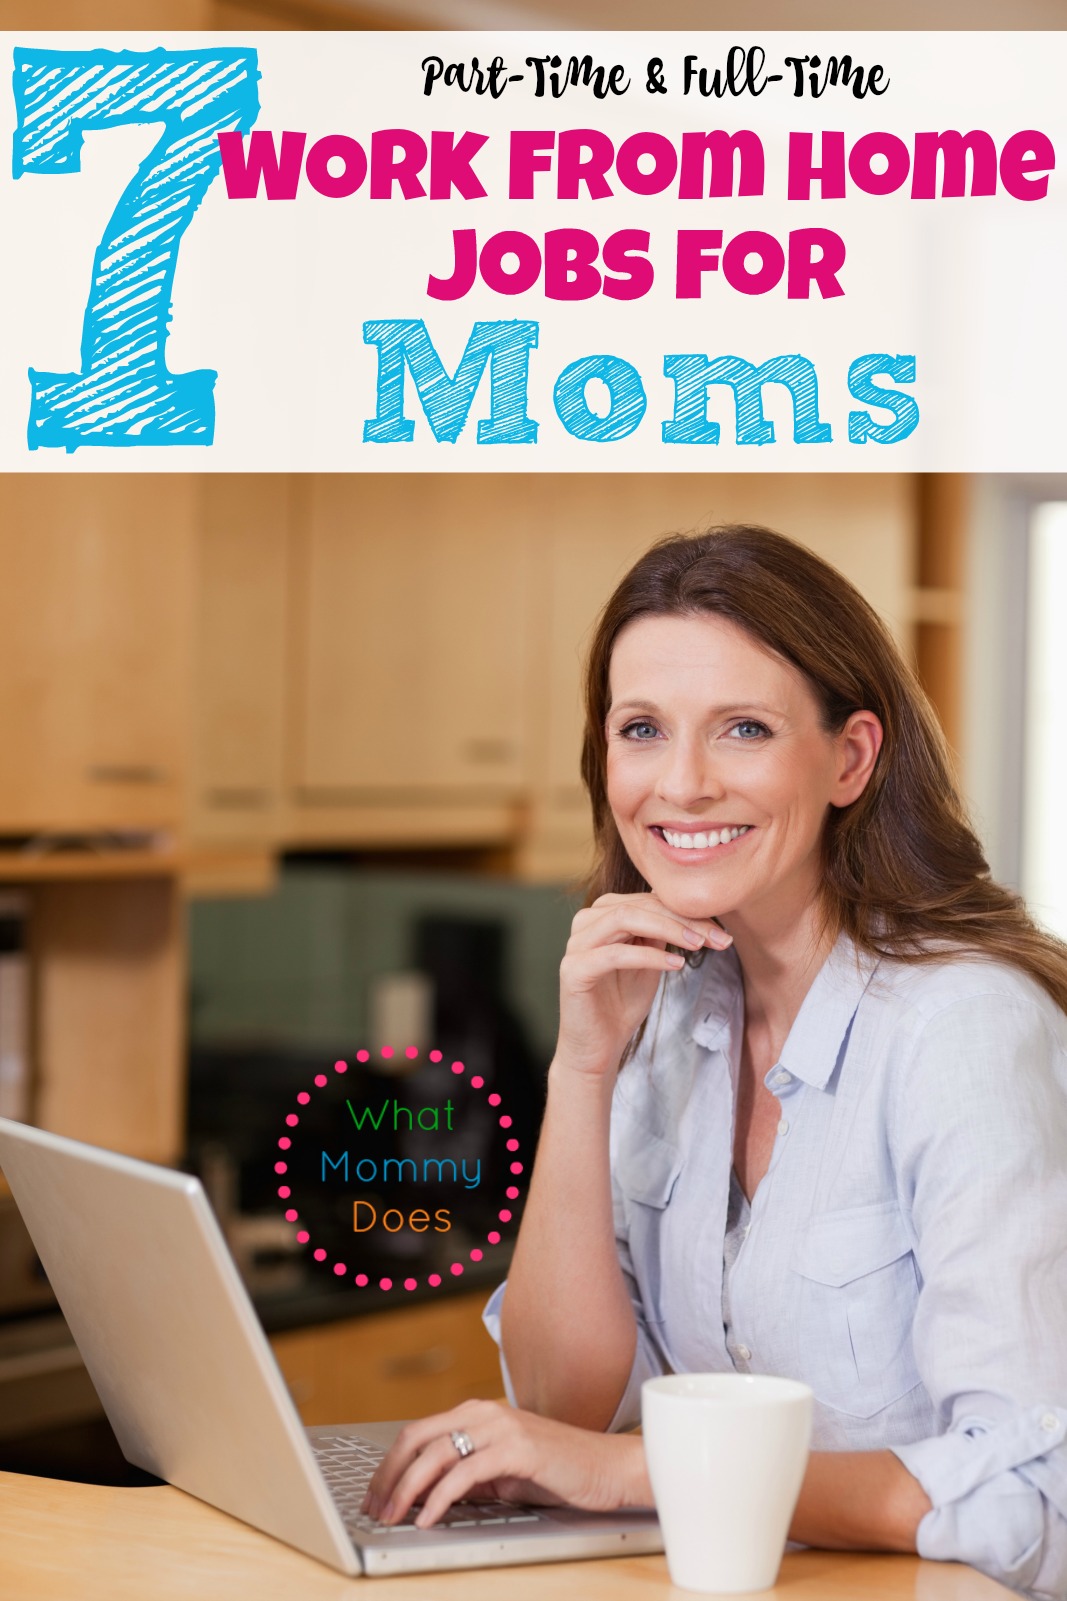 imate work from home jobs for moms